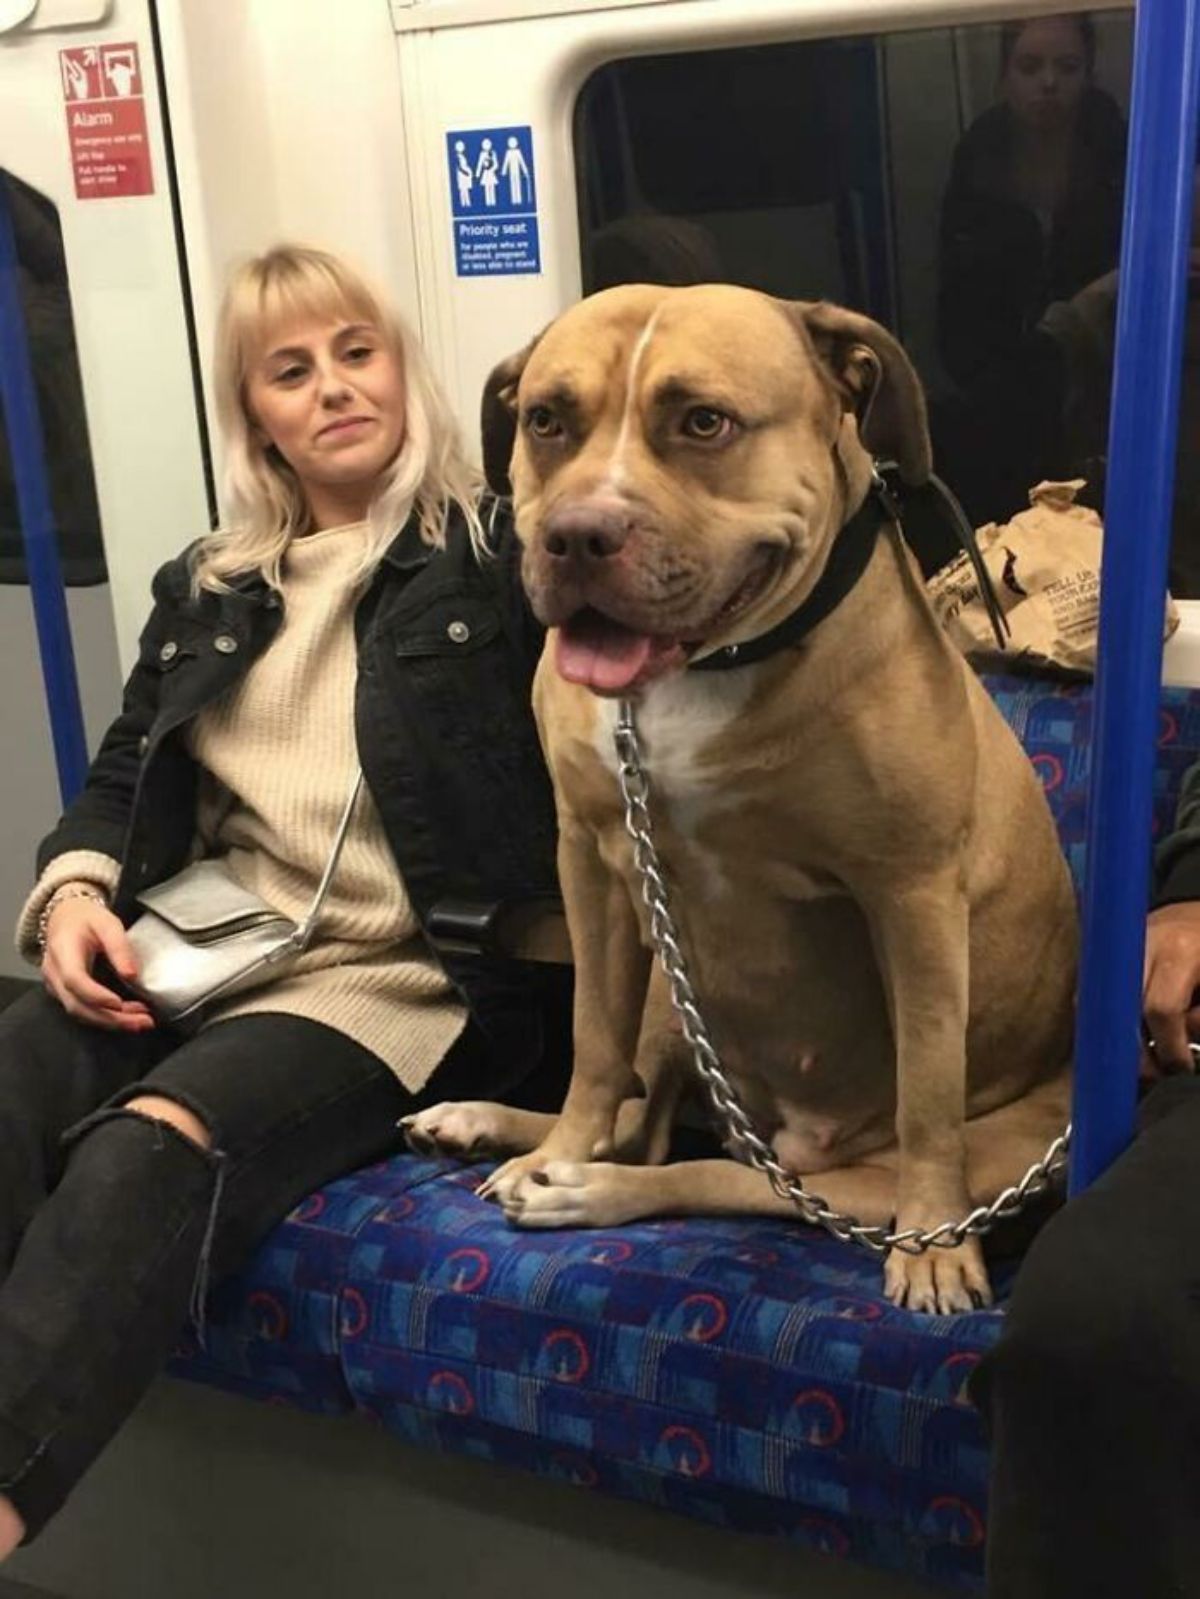 brown and white pitbull sitting on a seat in public transport next to a woman